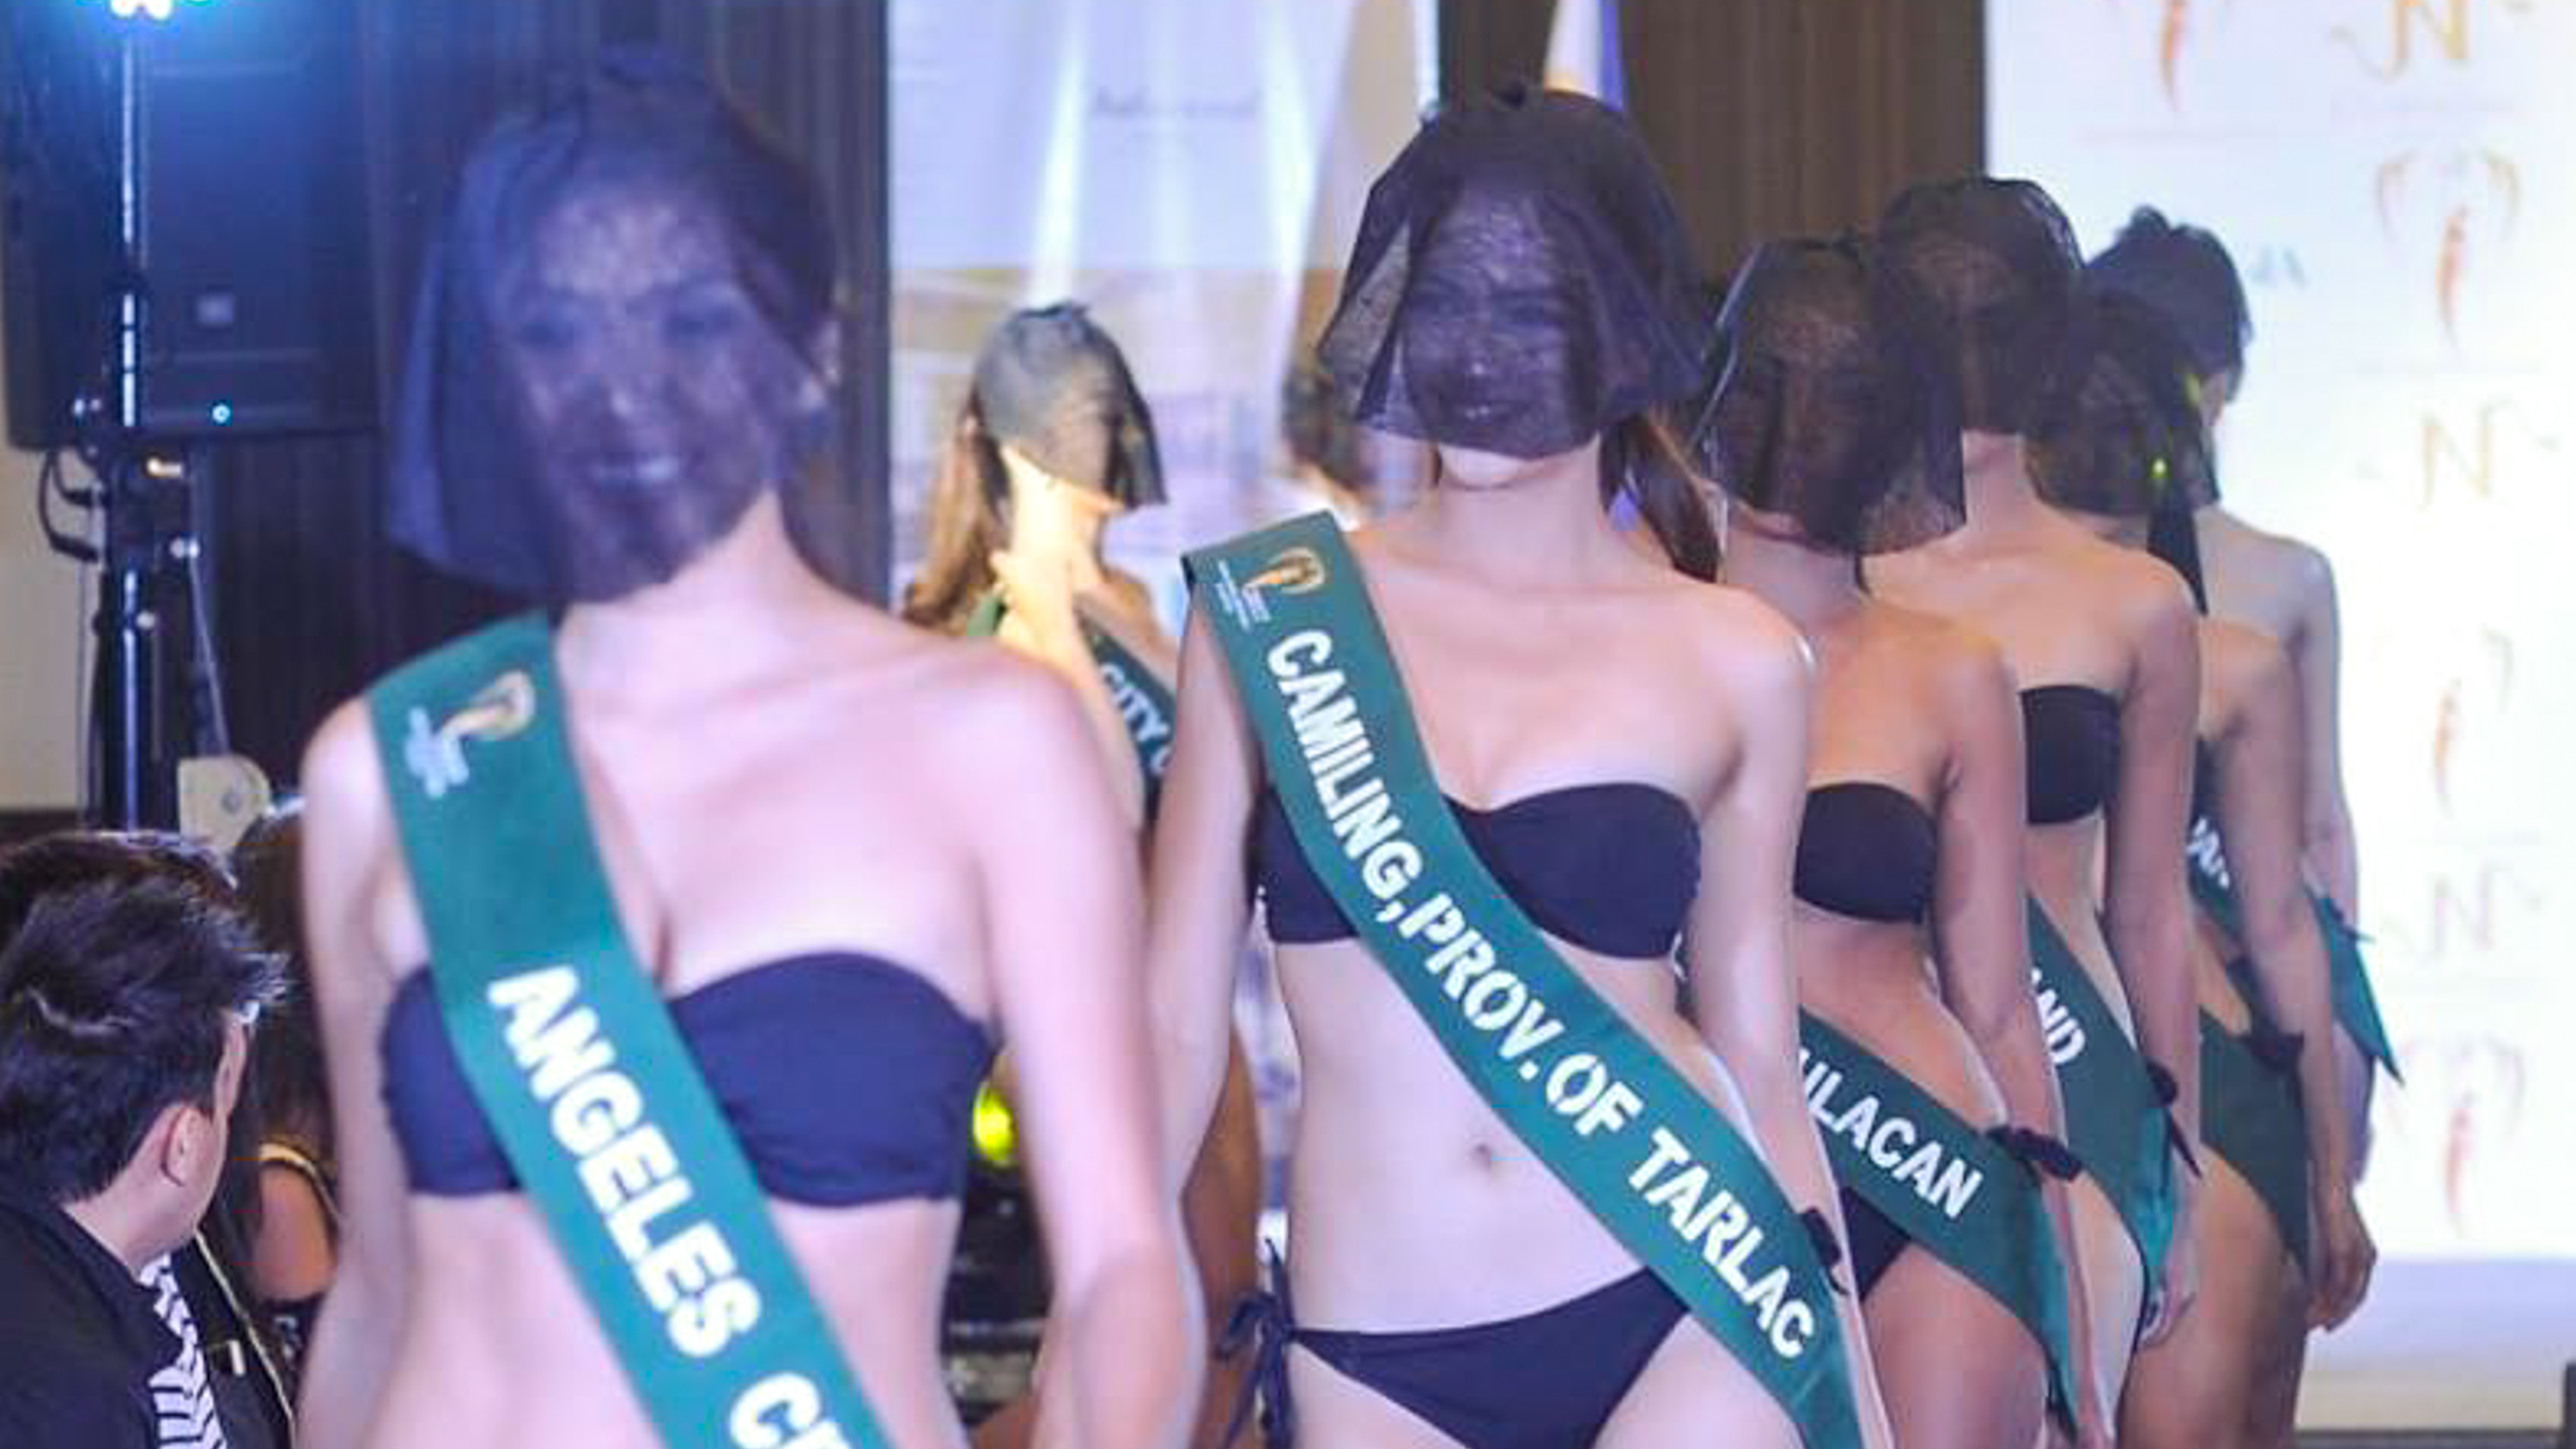 BLACK VEILS. The ladies at the Miss Philippines Earth swimsuit preliminaries wear black veils over their faces. Photo by ALX Studio Photography via screengrab from Facebook/OakwoodManila  